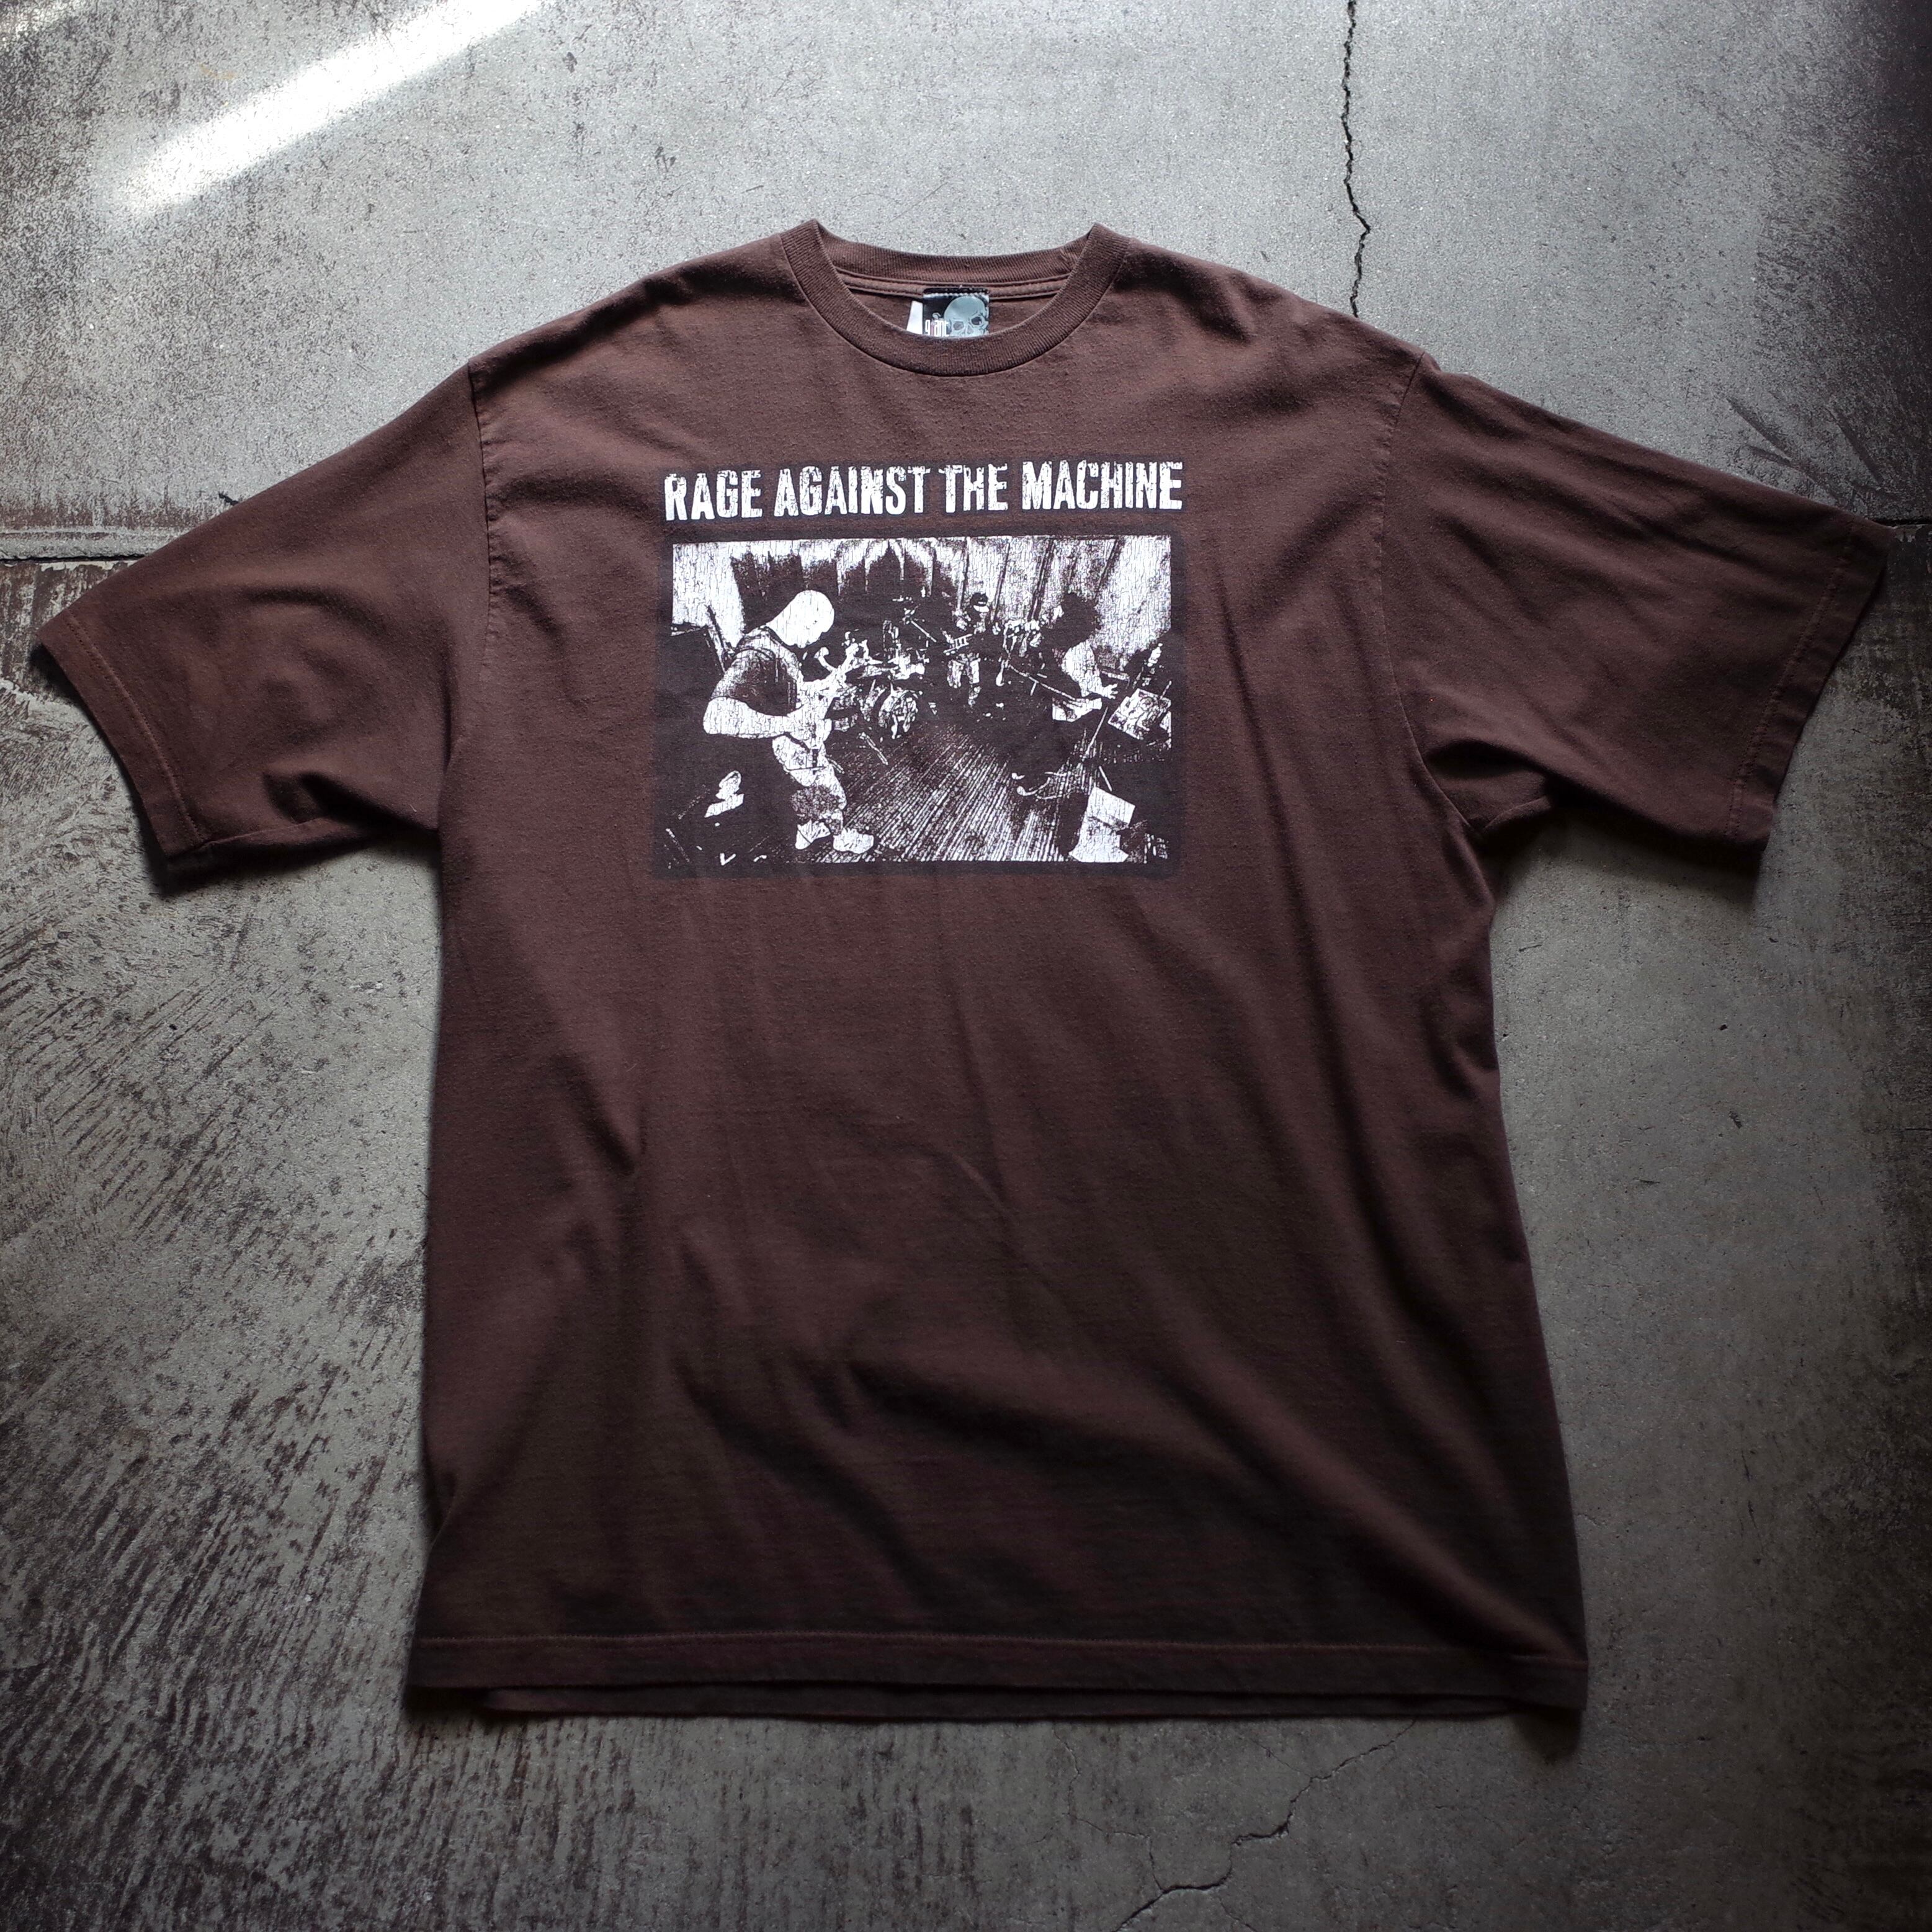 “RAGE AGAINST THE MACHINE” 『Evil Empire』Front Printed Rock T-shirt s/s ...